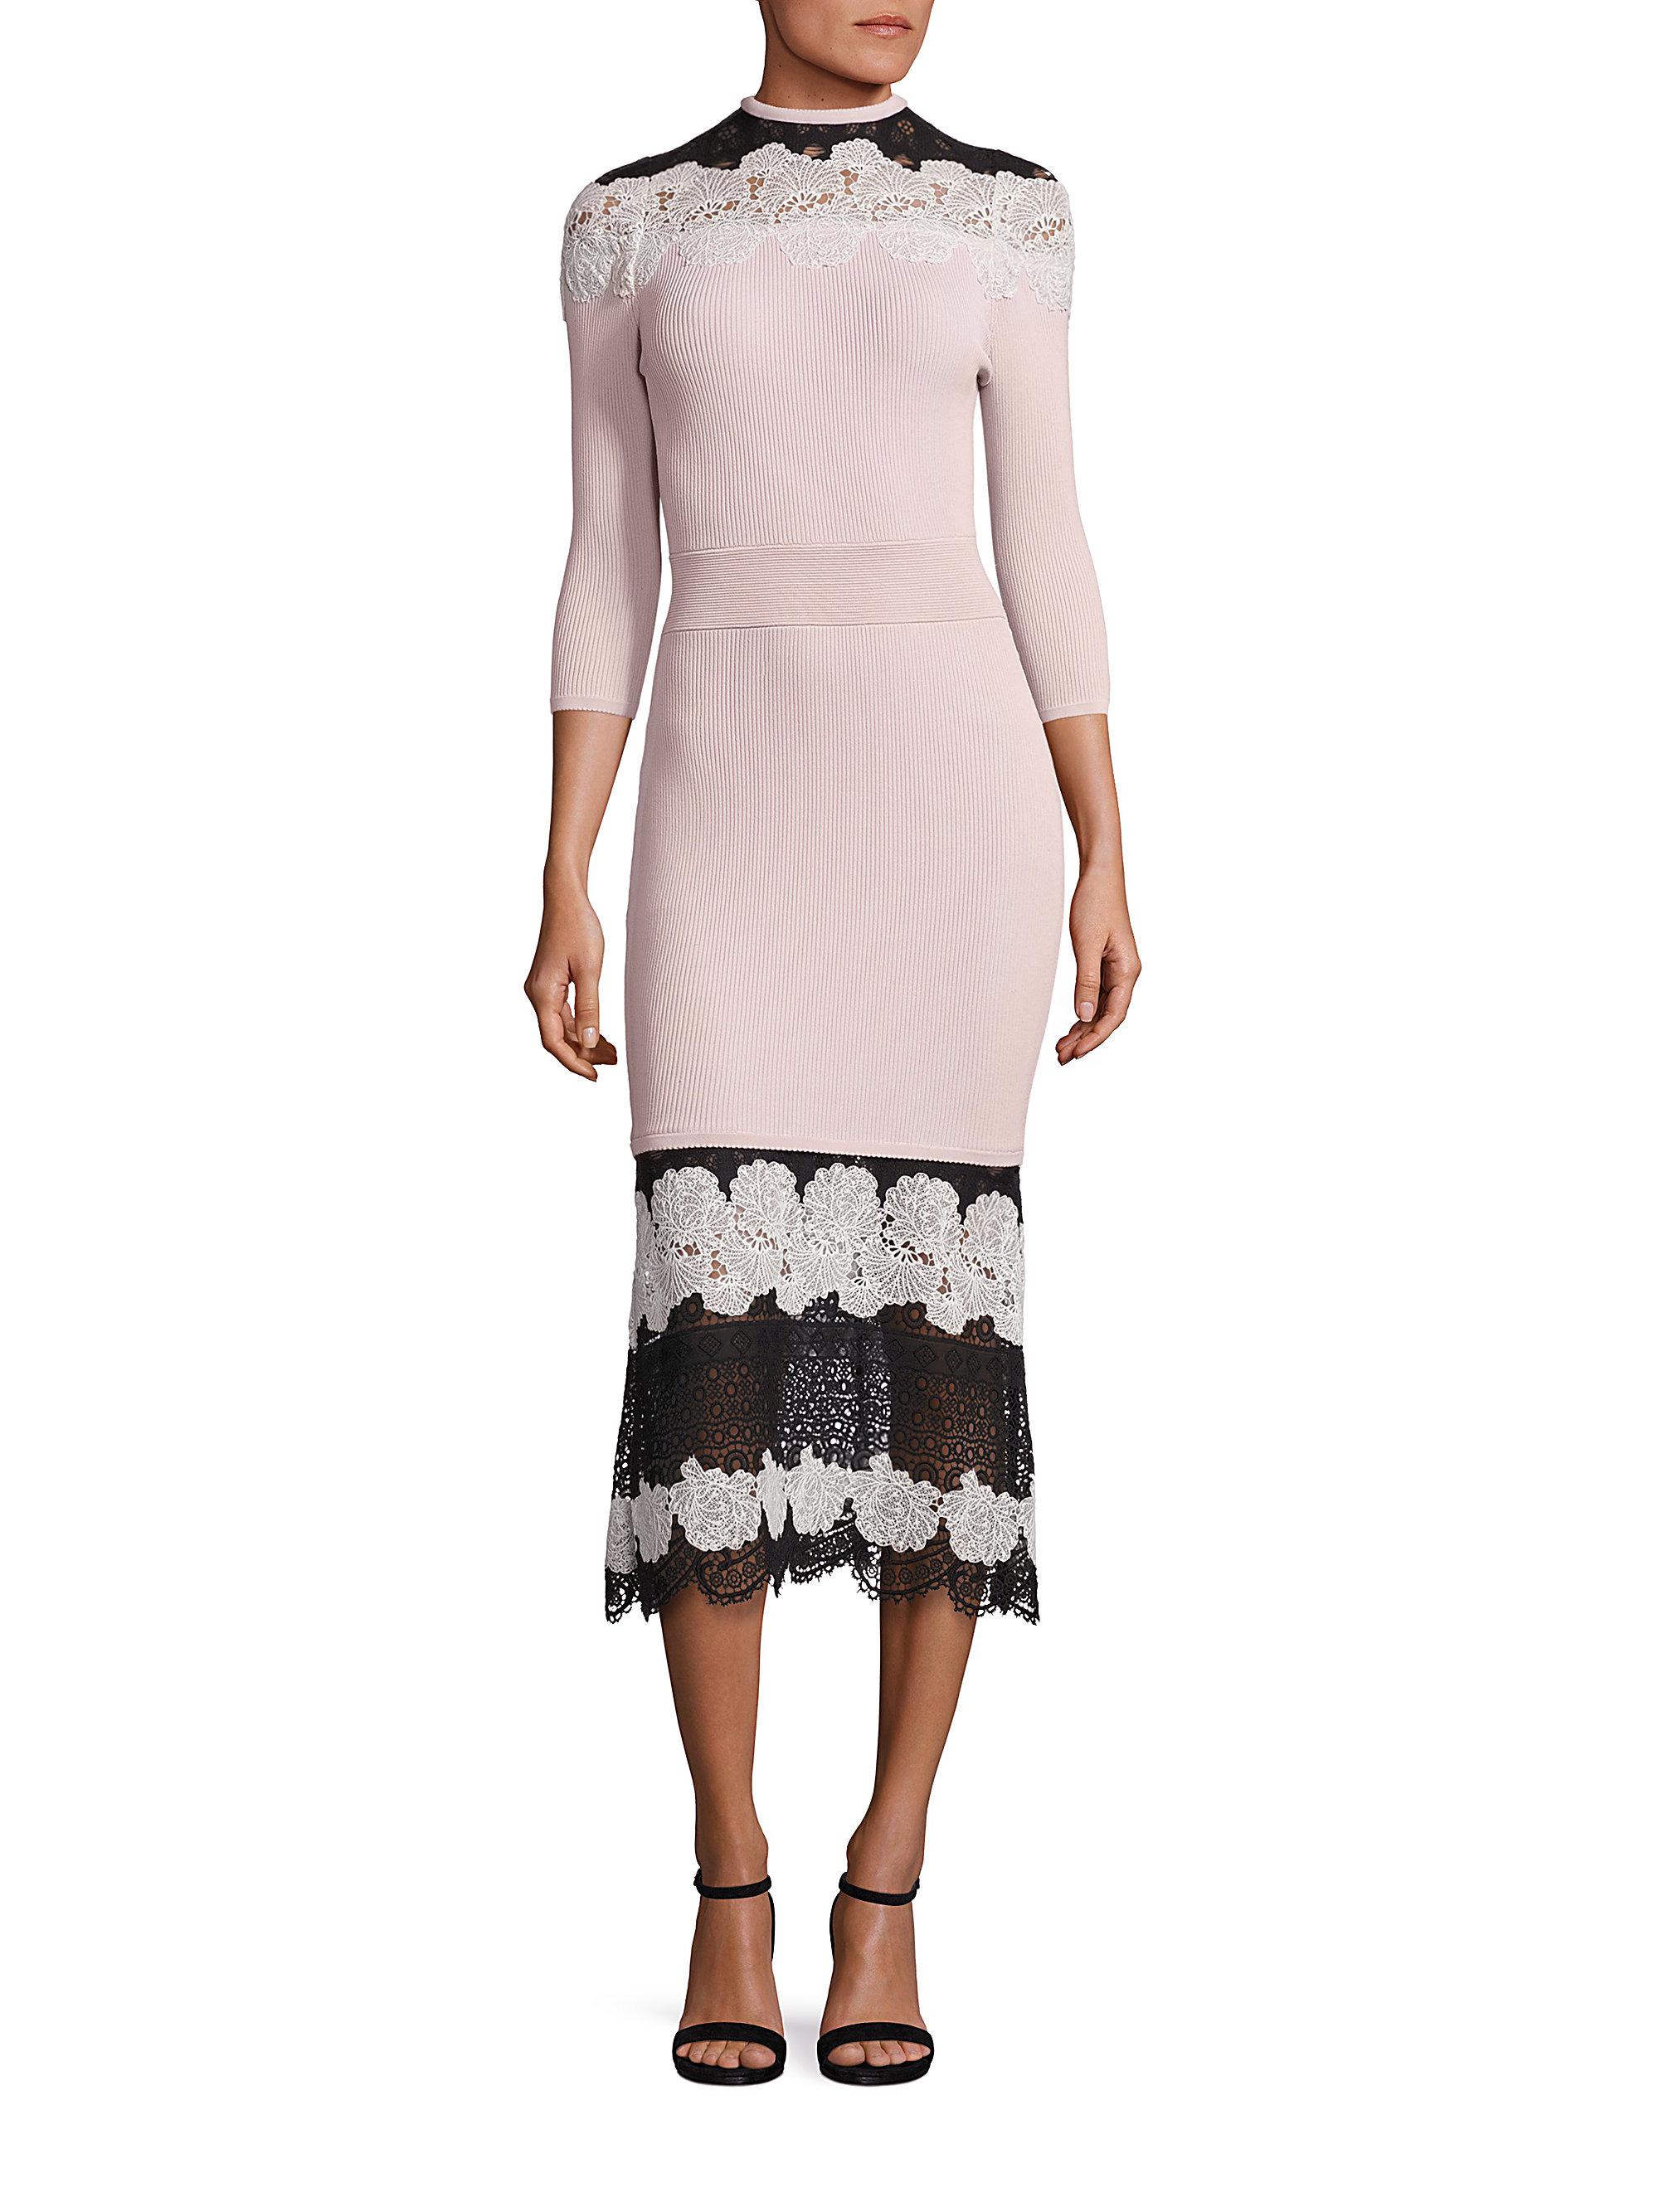 Lyst - Yigal Azrouël Mod Lace Combo Knit Dress in Pink